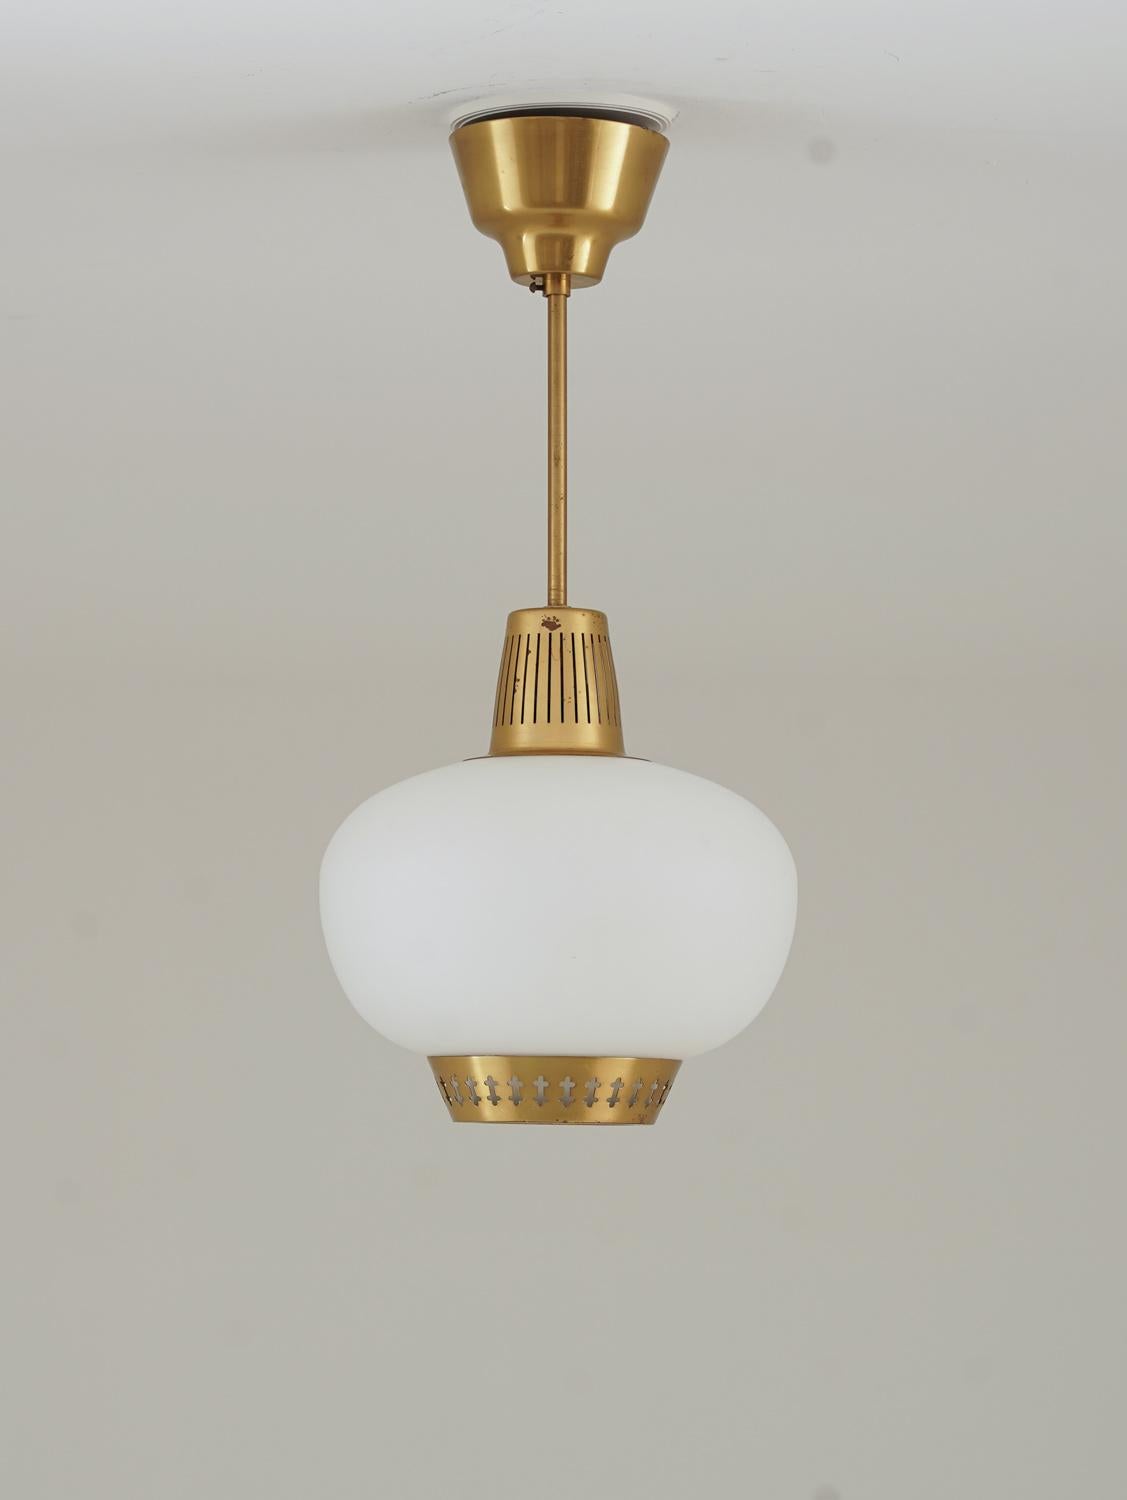 Midcentury pendants in brass and frosted opaline glass by Hans Bergström for Ateljé Lyktan, Sweden, 1950s.
This great looking pendant is made with the quality and details that Hans Bergström is famous for. The opaline glass shade gives a soft, cozy